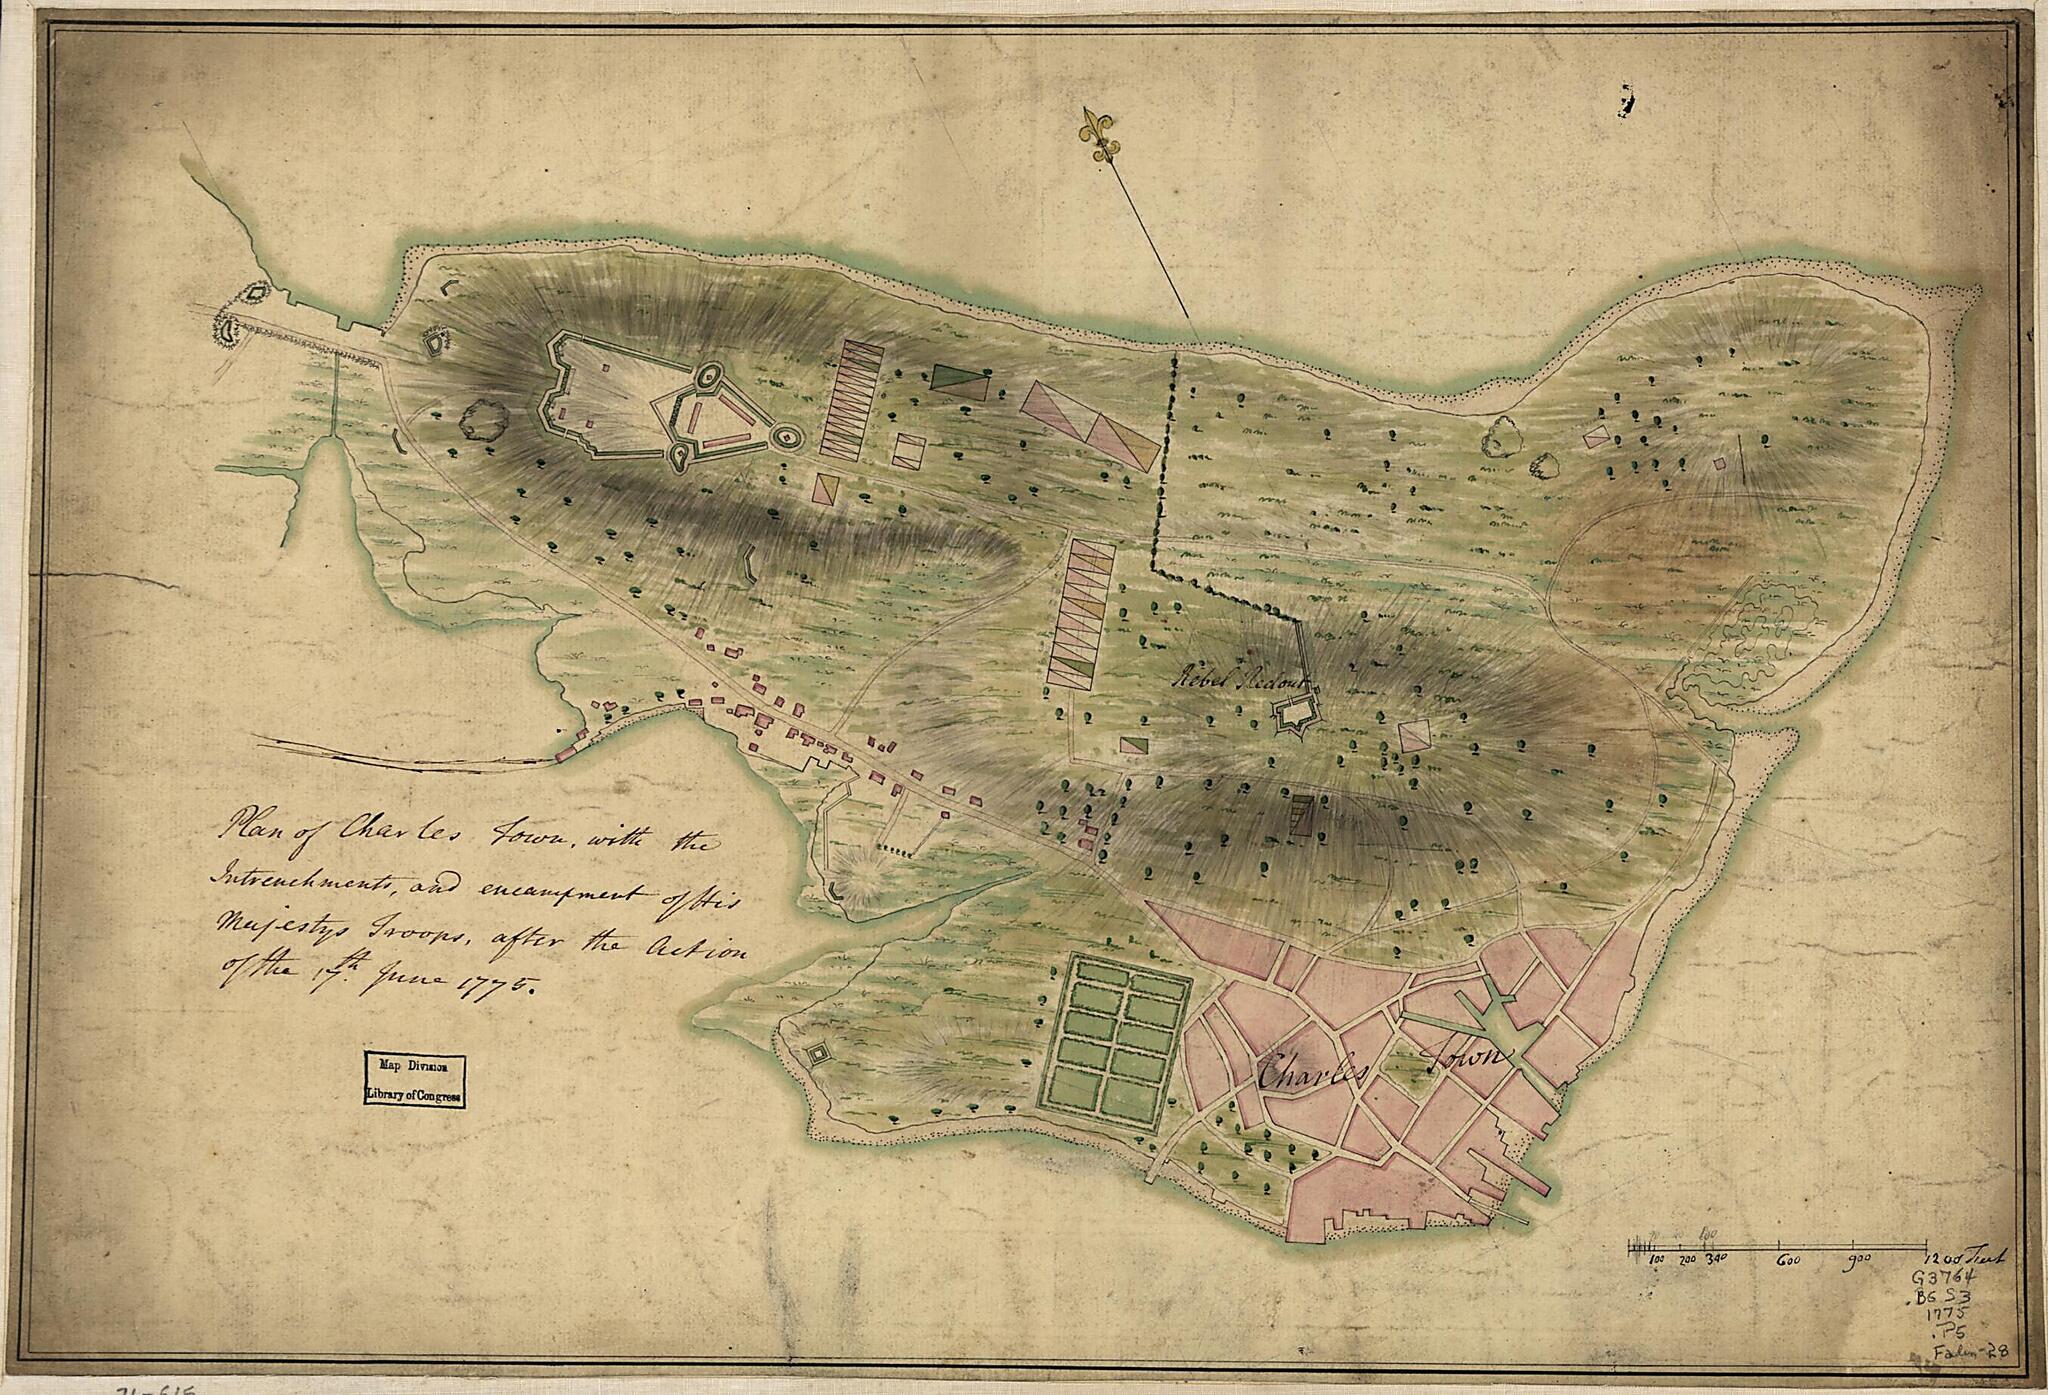 This old map of Plan of Charles Town, With the Intrenchments, and Encampment of His Majesty&